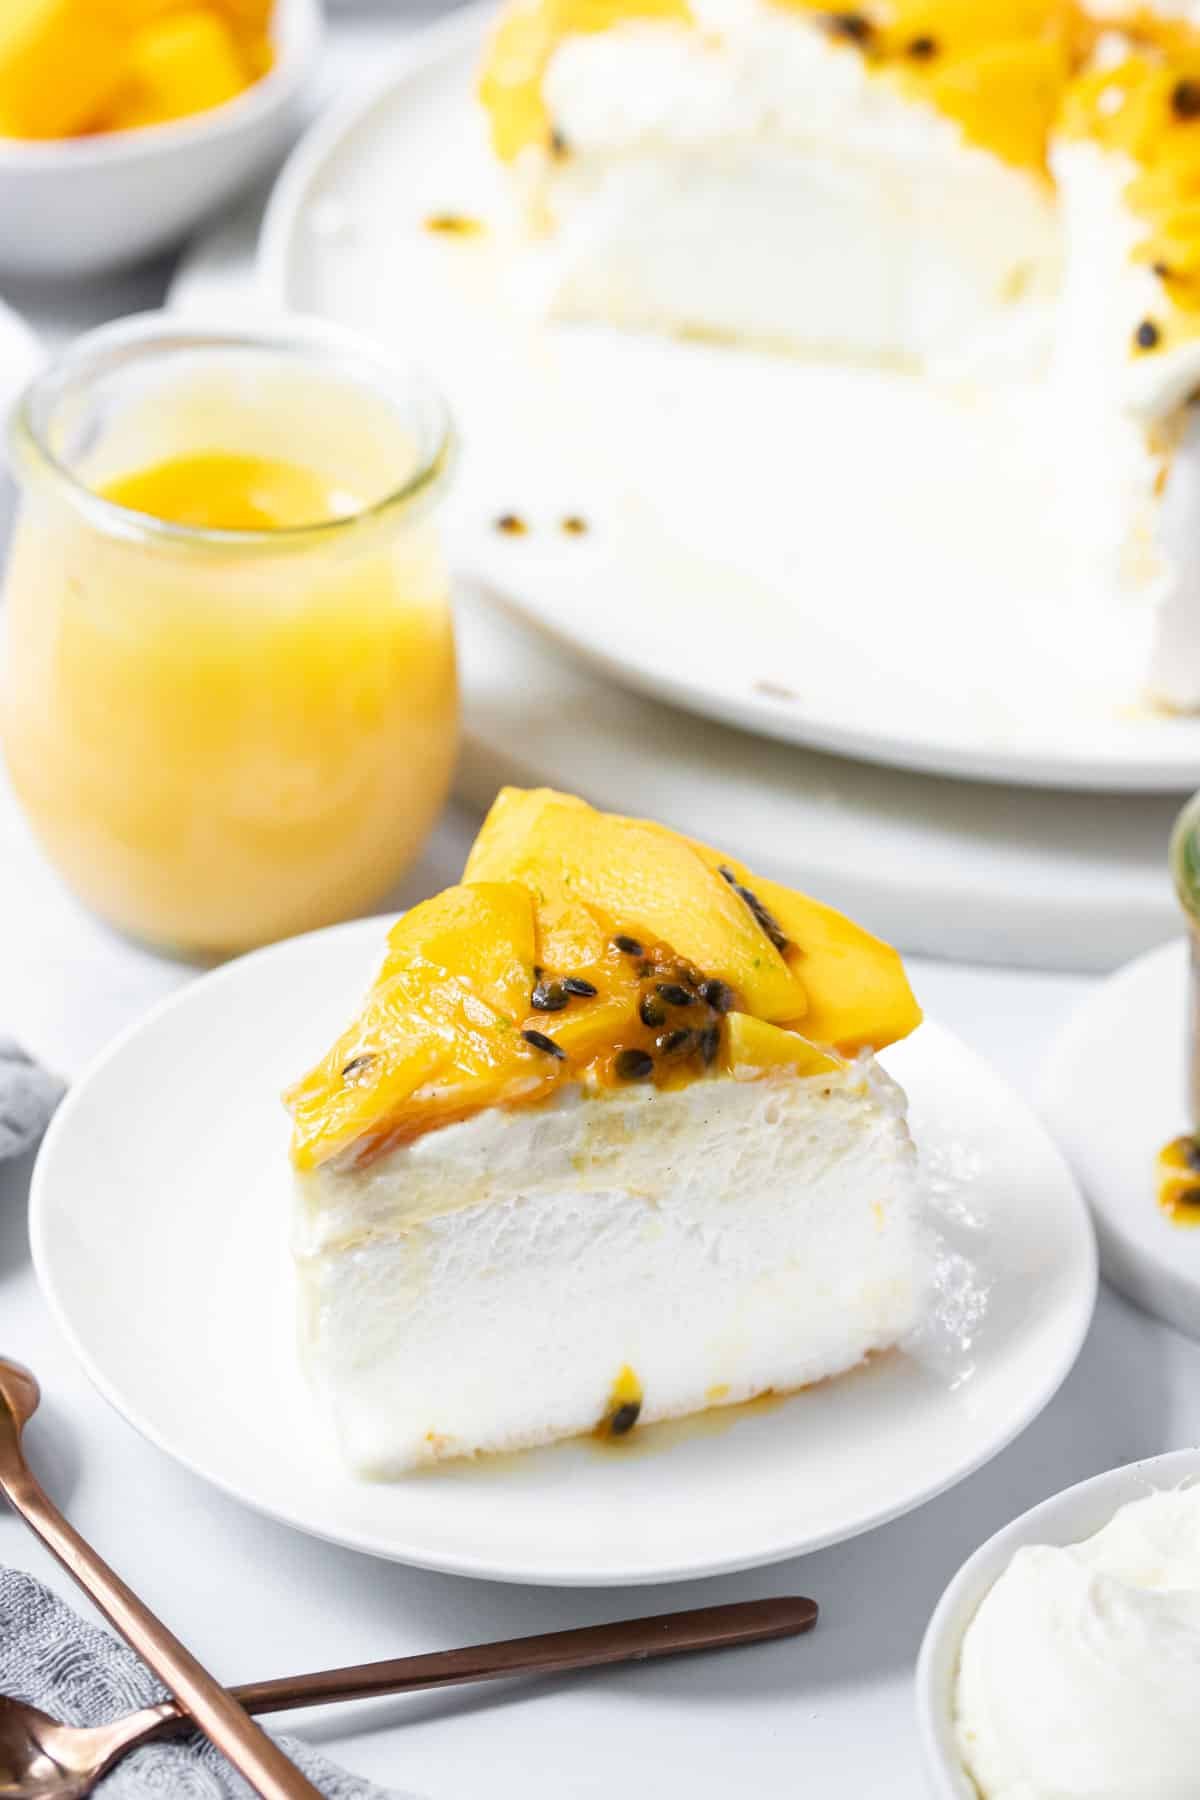 a slice of pavlova on a plate, topped with mango and passion fruit.